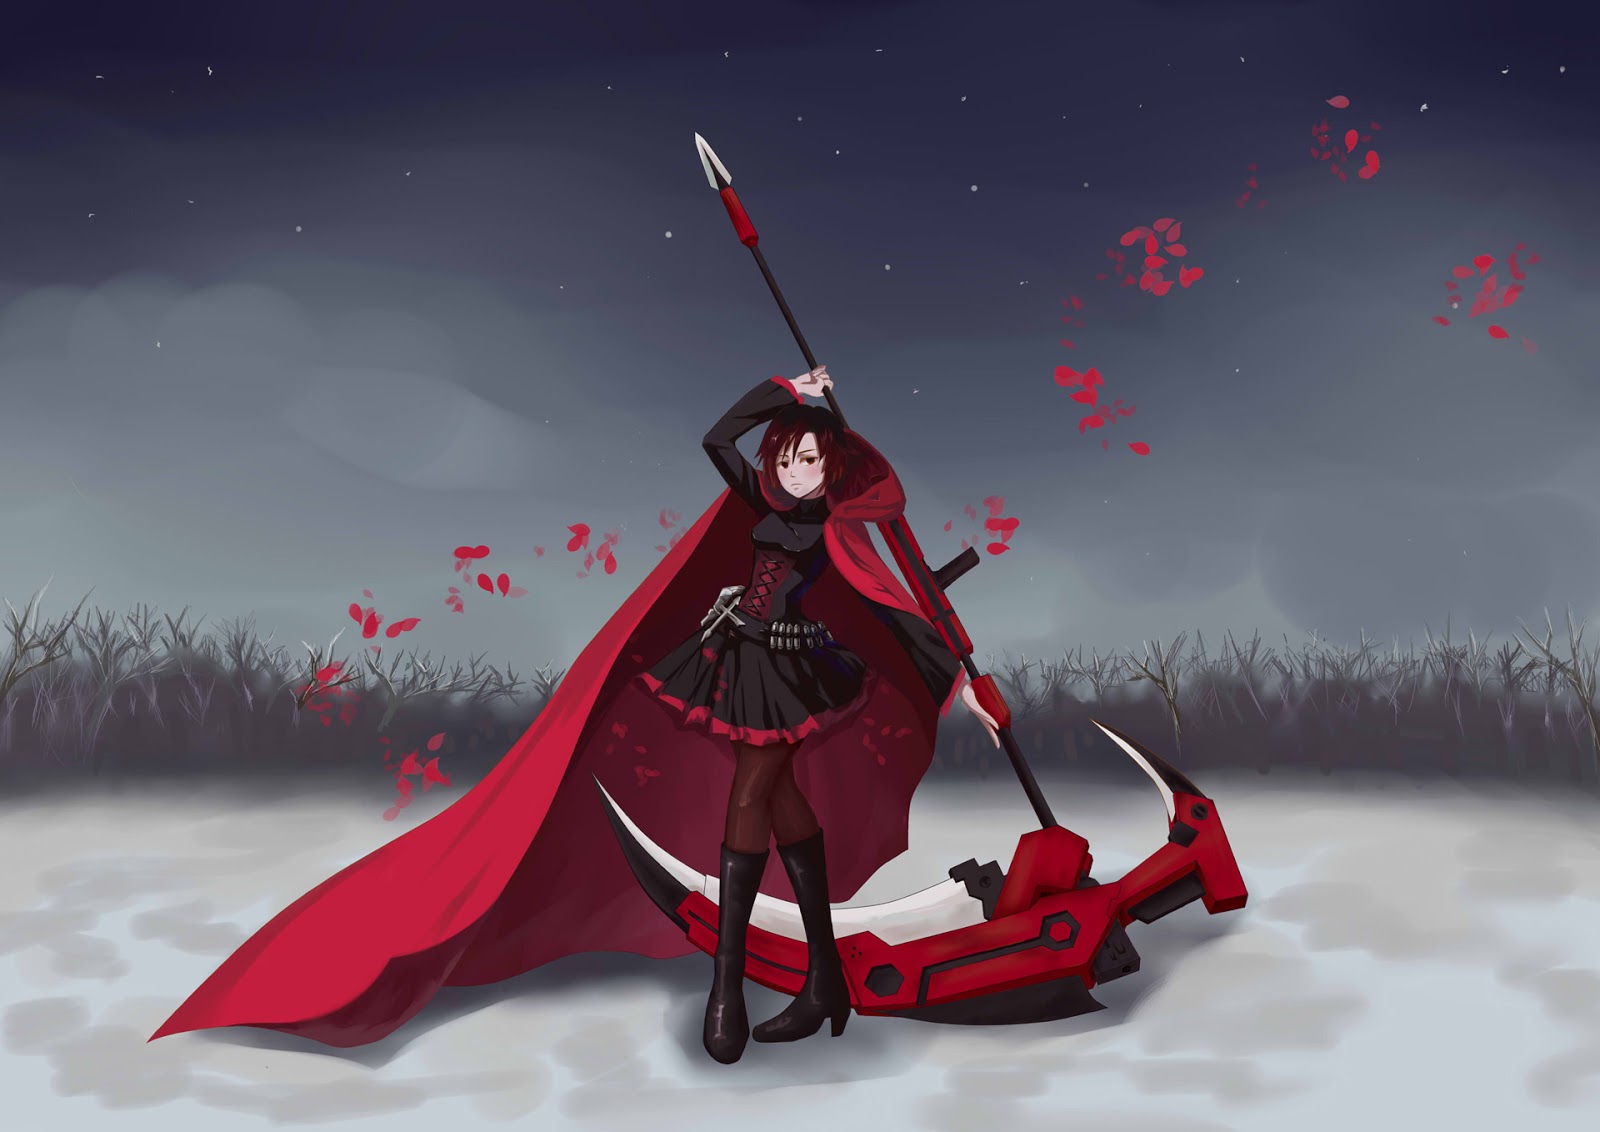 Free download Rose RWBY Anime Girl Red Cape Death Scythe Black Dress HD Wallpaper [1600x1132] for your Desktop, Mobile & Tablet. Explore Cool RWBY Wallpaper. RWBY Weiss Wallpaper, RWBY